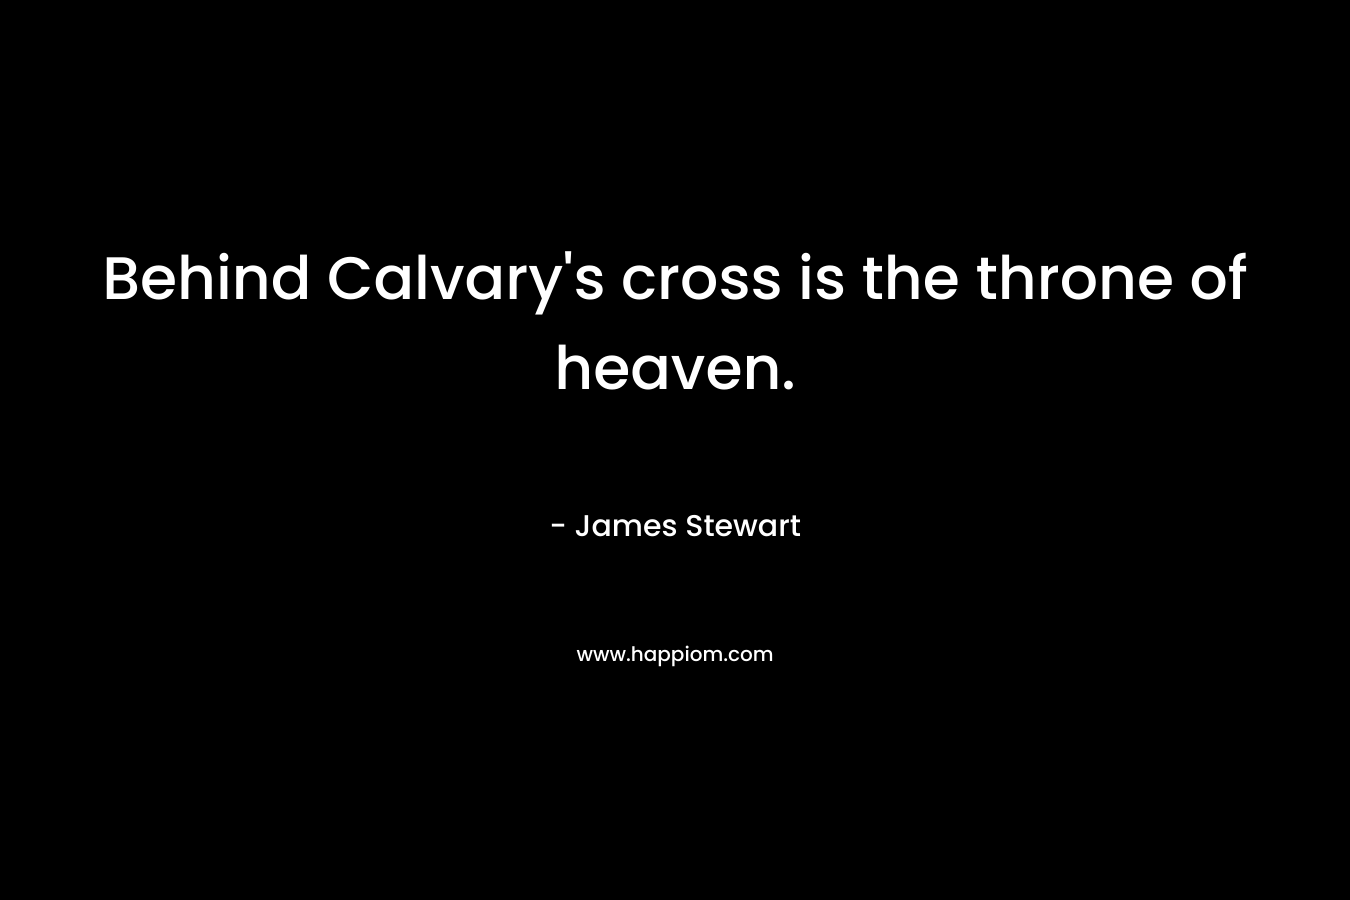 Behind Calvary's cross is the throne of heaven.